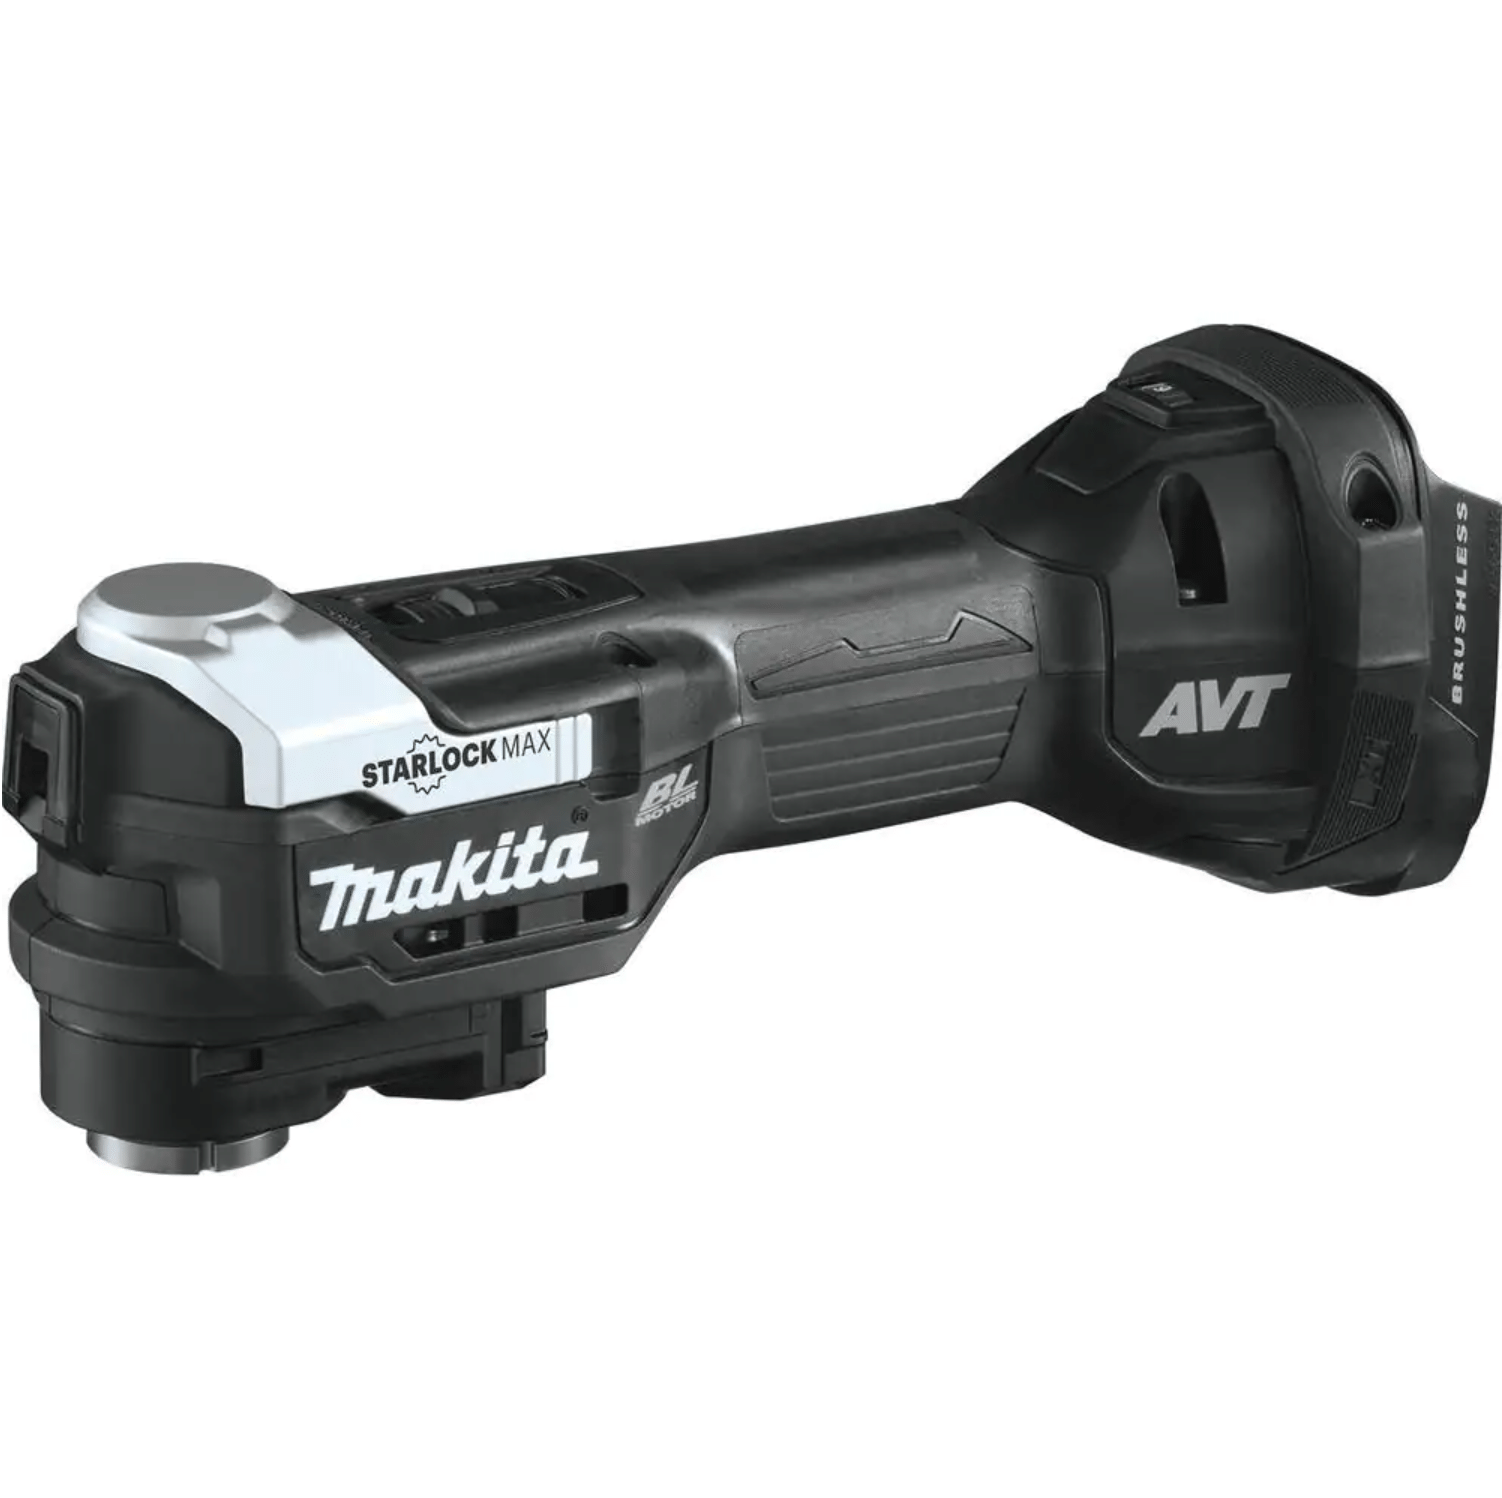 Makita 18-Volt LXT Sub-Compact Lithium-Ion Brushless StarlockMax Cordless Multi-Tool (Tool Only), XMT04ZB